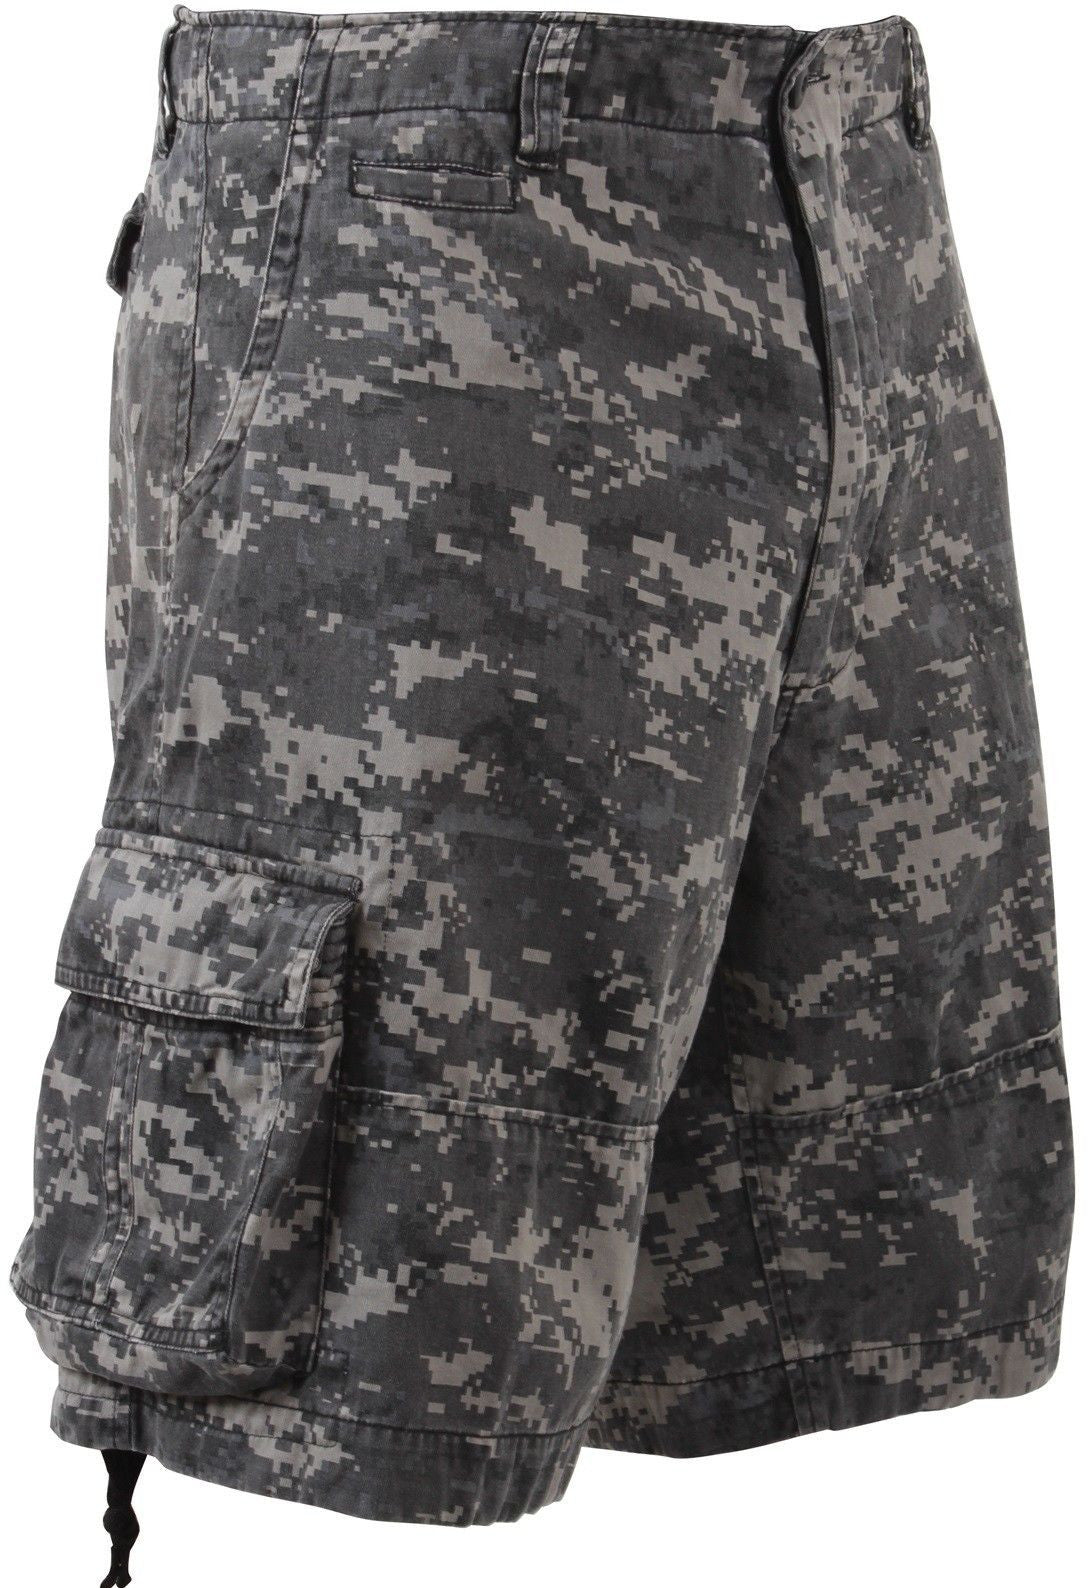 Shorts Shorts Utility Digital Camo Cargo – - Relaxed Infantry Grunt - Force Vintage